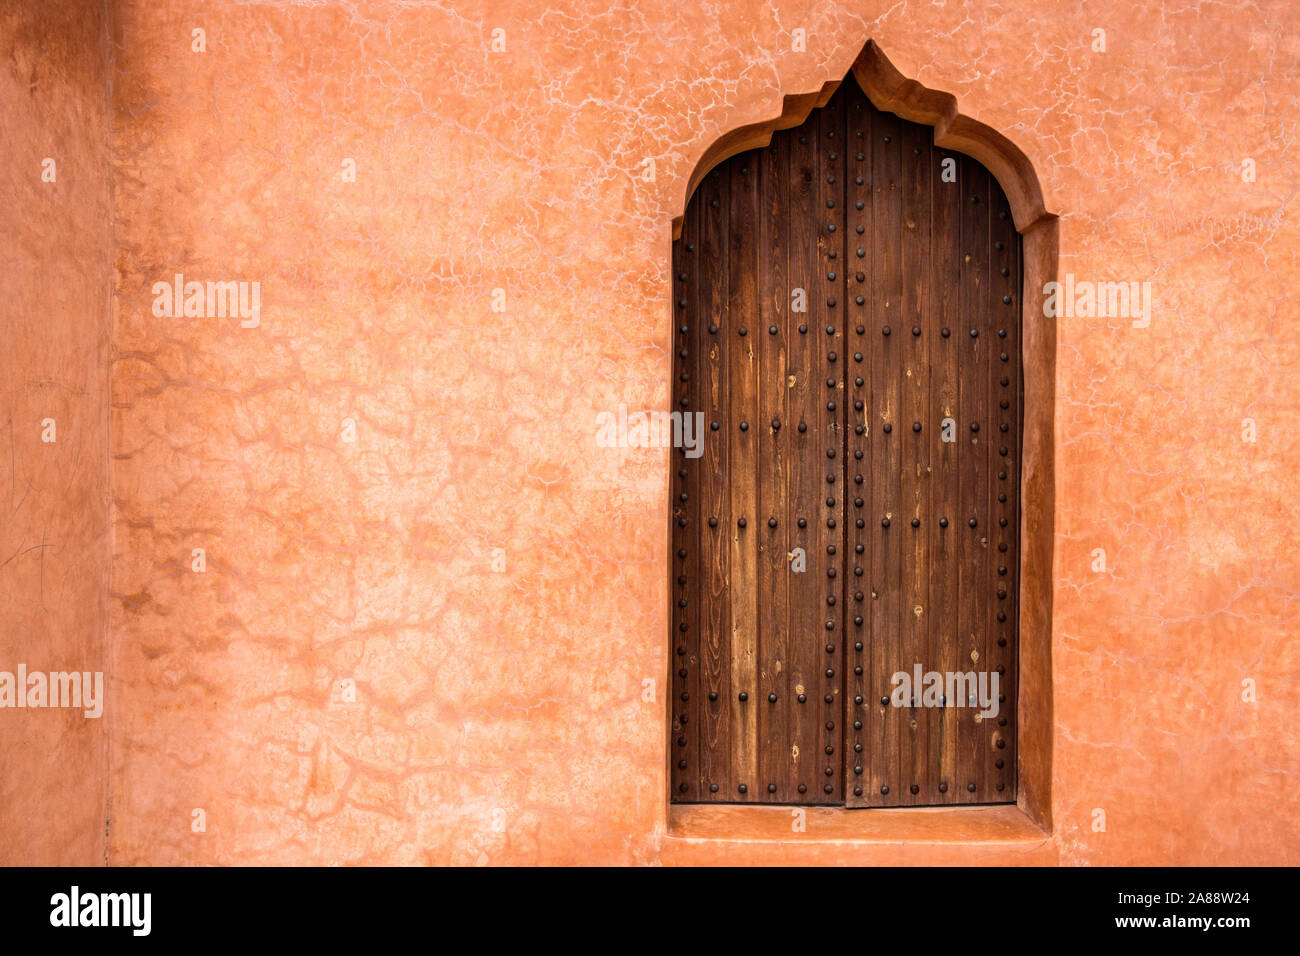 Morocco, Marrakesh. The Menara gardens. Architectural detail on a wooden door on a wall in ocher. Stock Photo